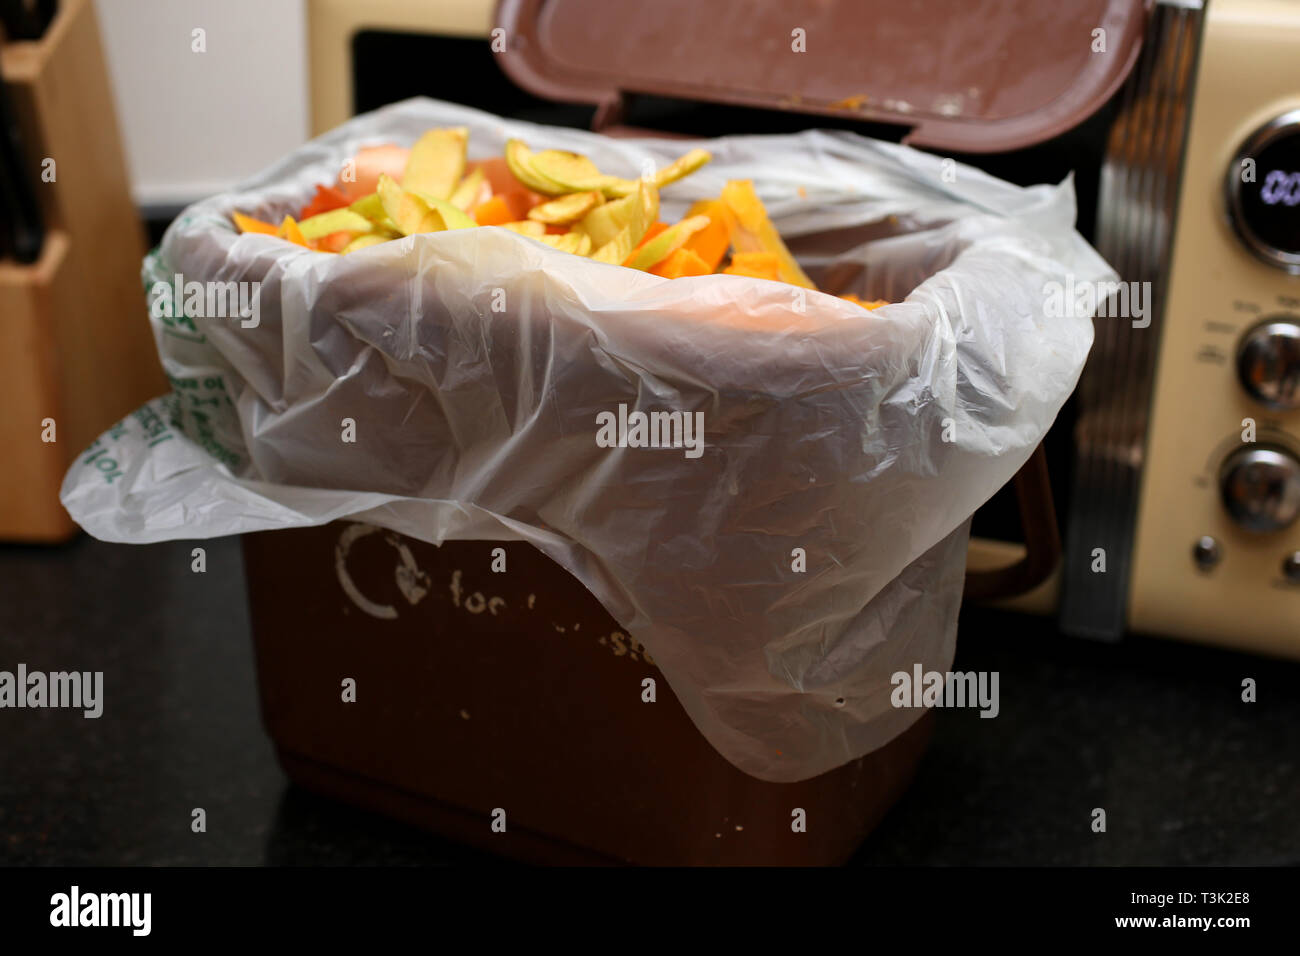 General views of food waste being collected for a brown food waste recycling box in a home in Southampton, Hampshire, UK. Stock Photo